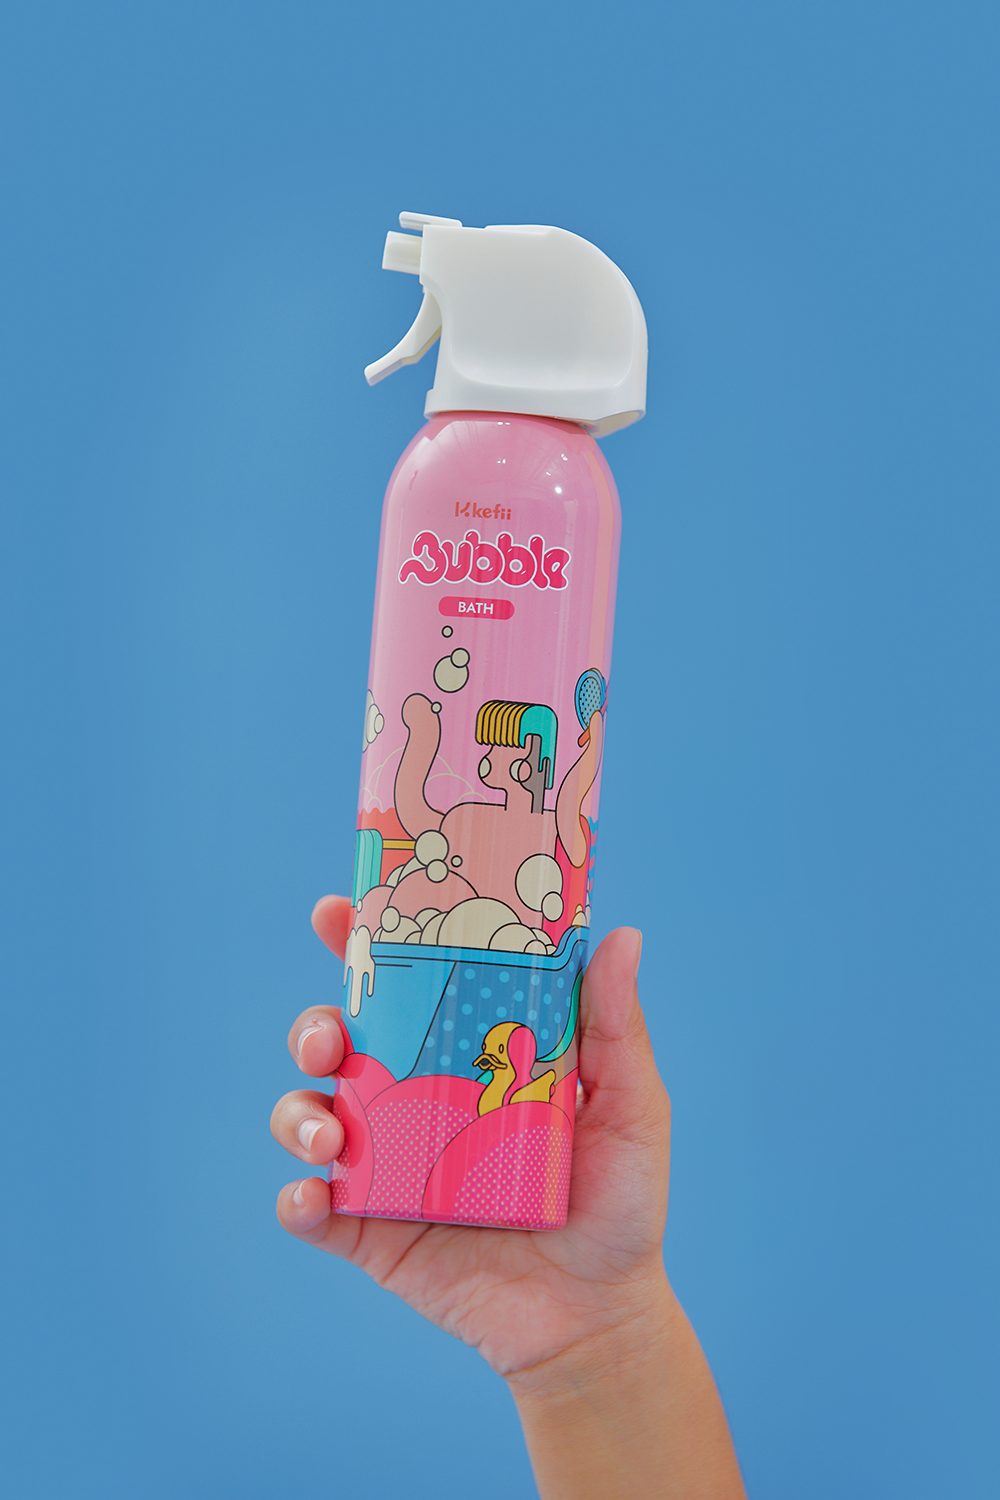 Bubble Cleanser 200ml (Original) – Bubbly Lovely